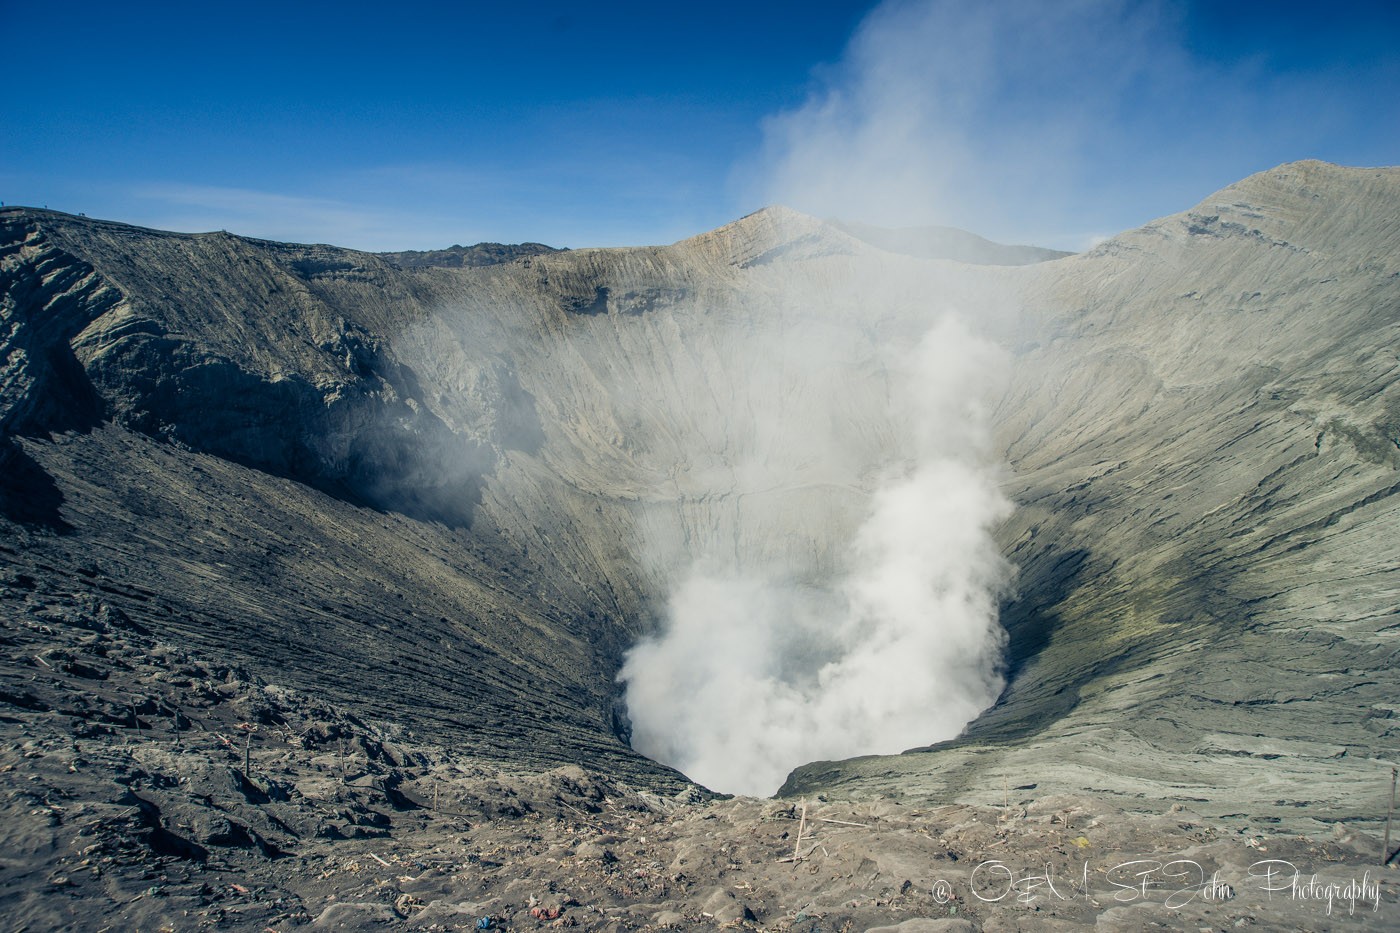 Looking into the crater at Mt Bromo. East Java. Indonesia